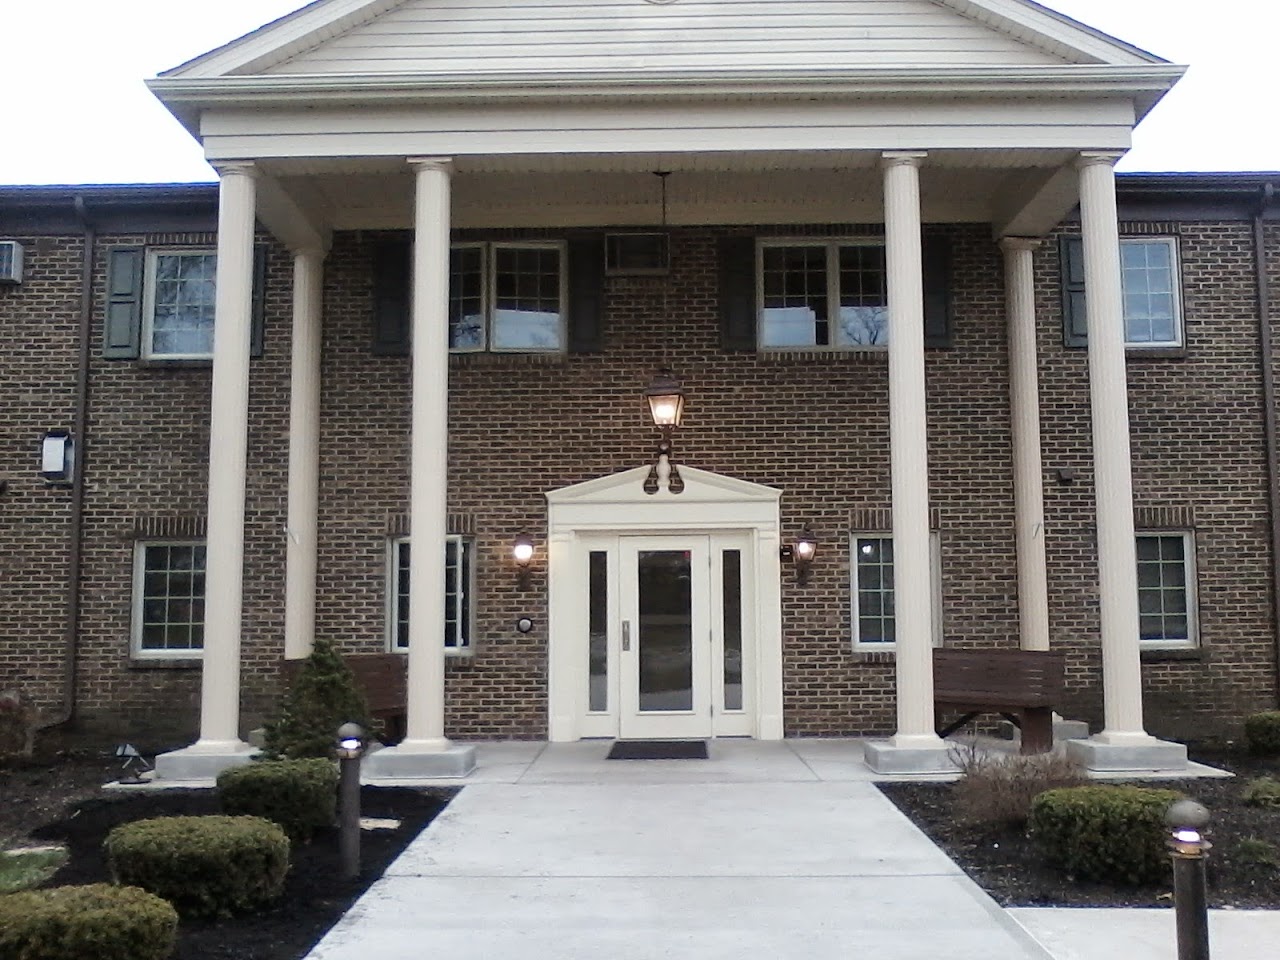 Photo of PLEASANT VIEW. Affordable housing located at 114 ACADEMY ST PLEASANTVILLE, OH 43148